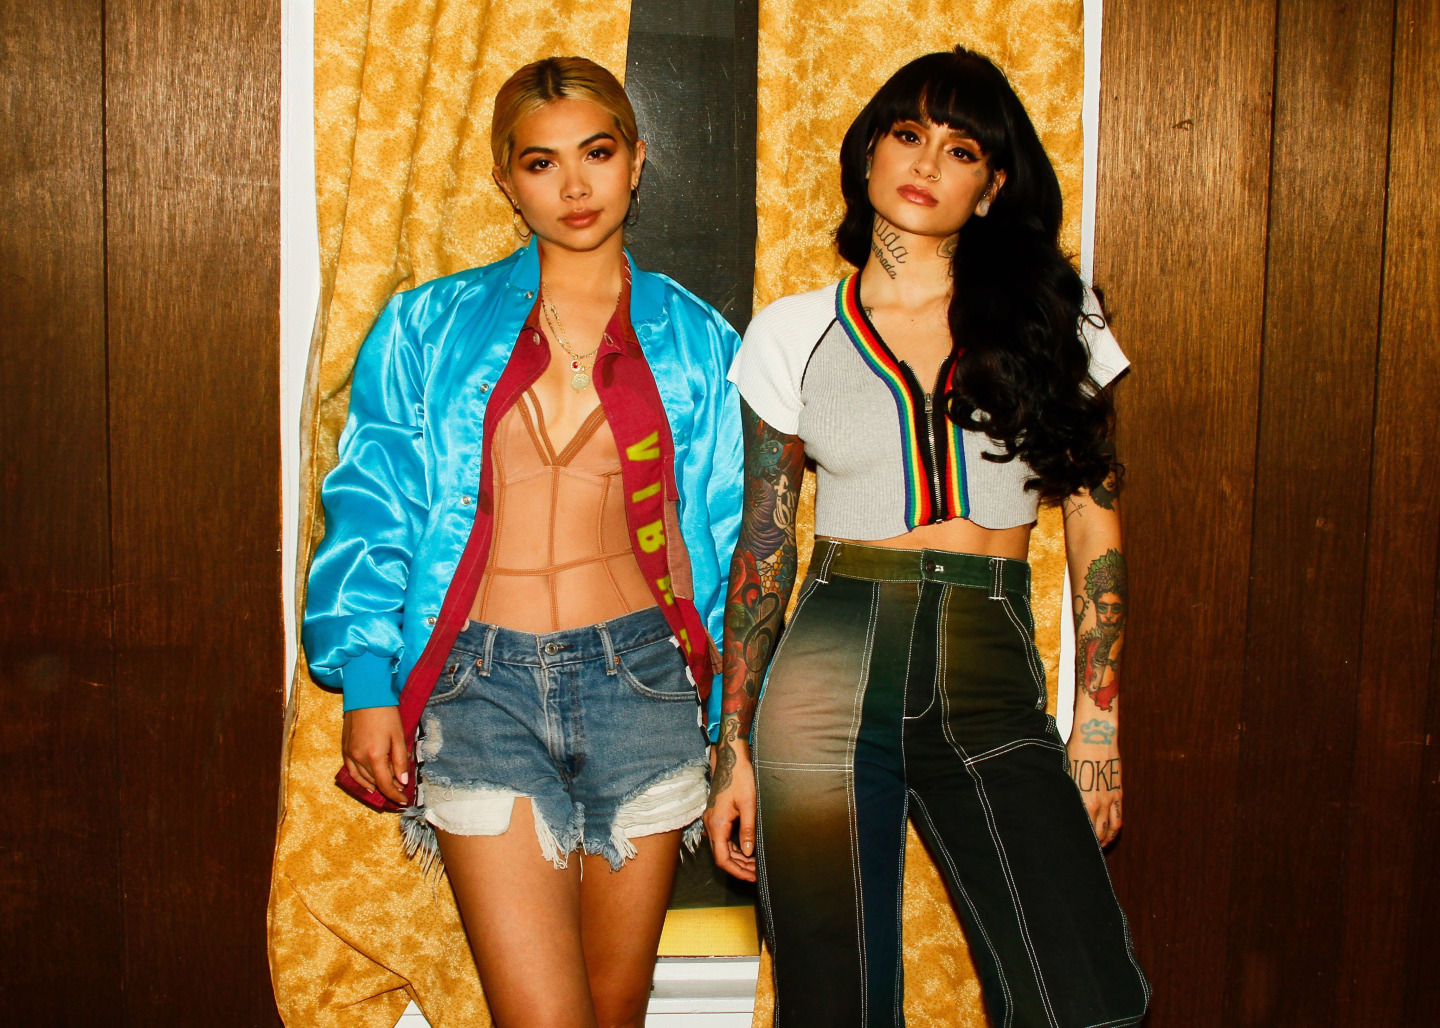 Hayley Kiyoko and Kehlani: a conversation between two young queer icons